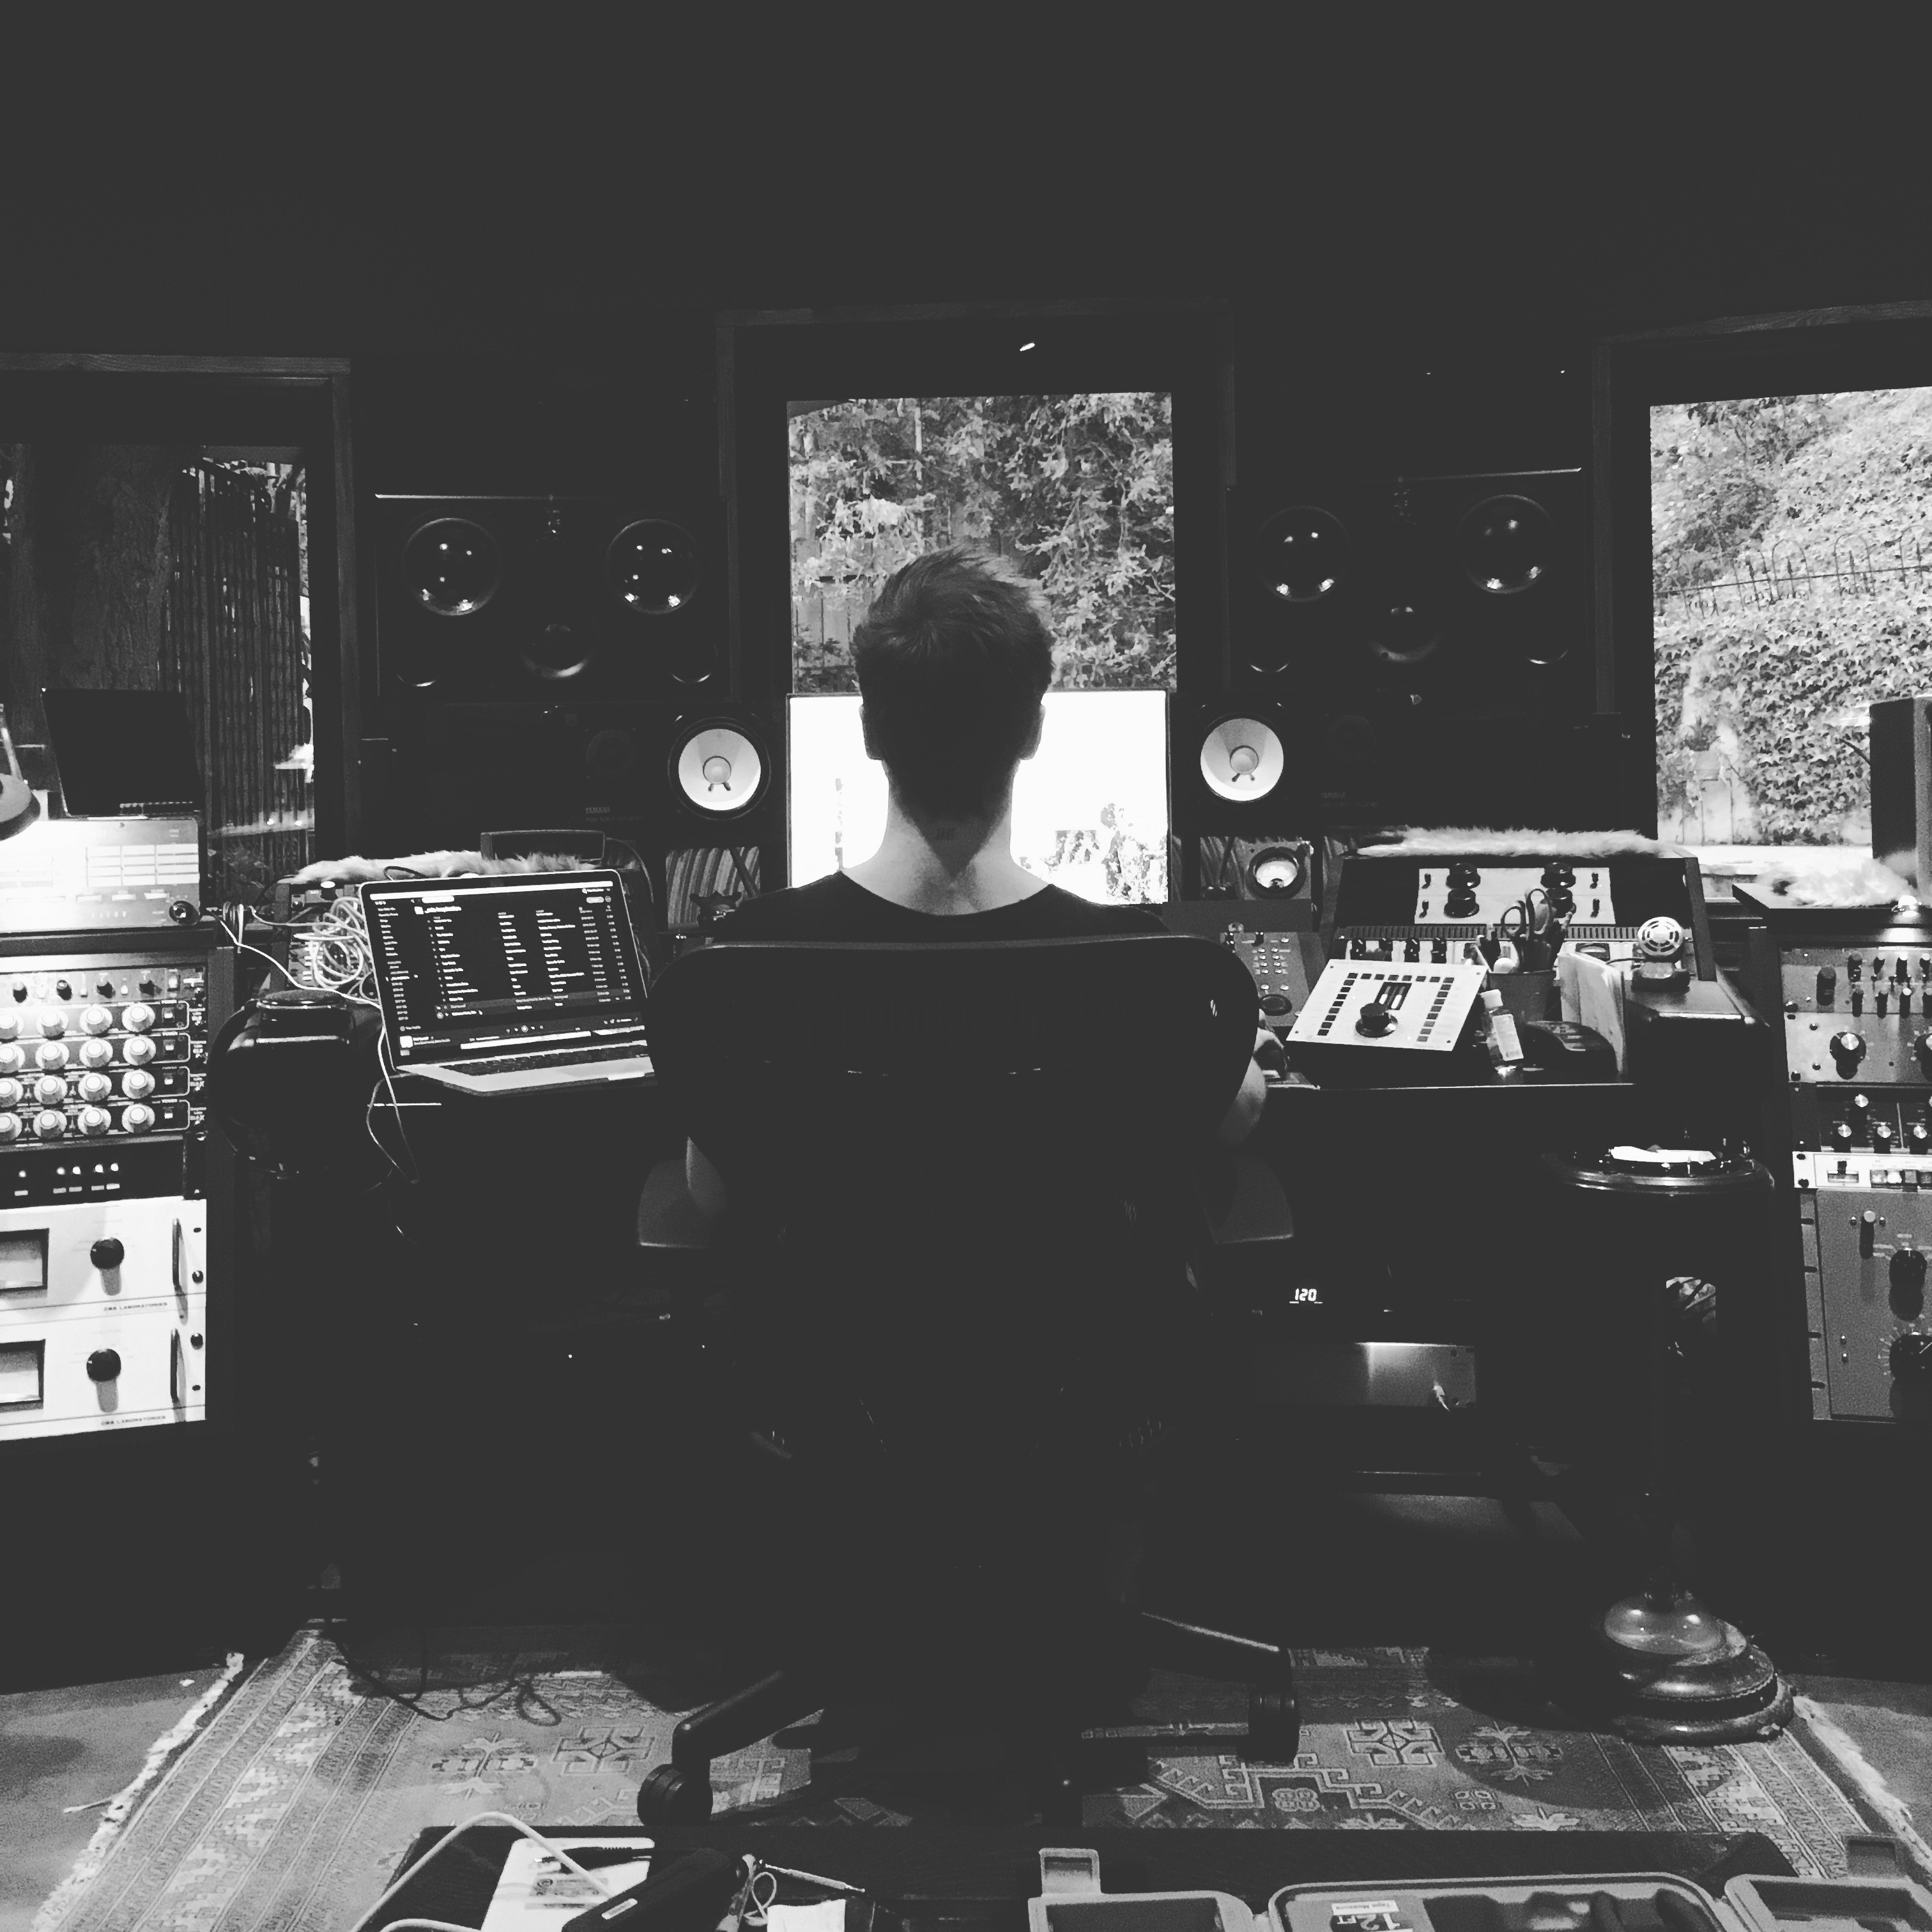 Ross Newbauer, Mix Engineer from Los Angeles, CA.